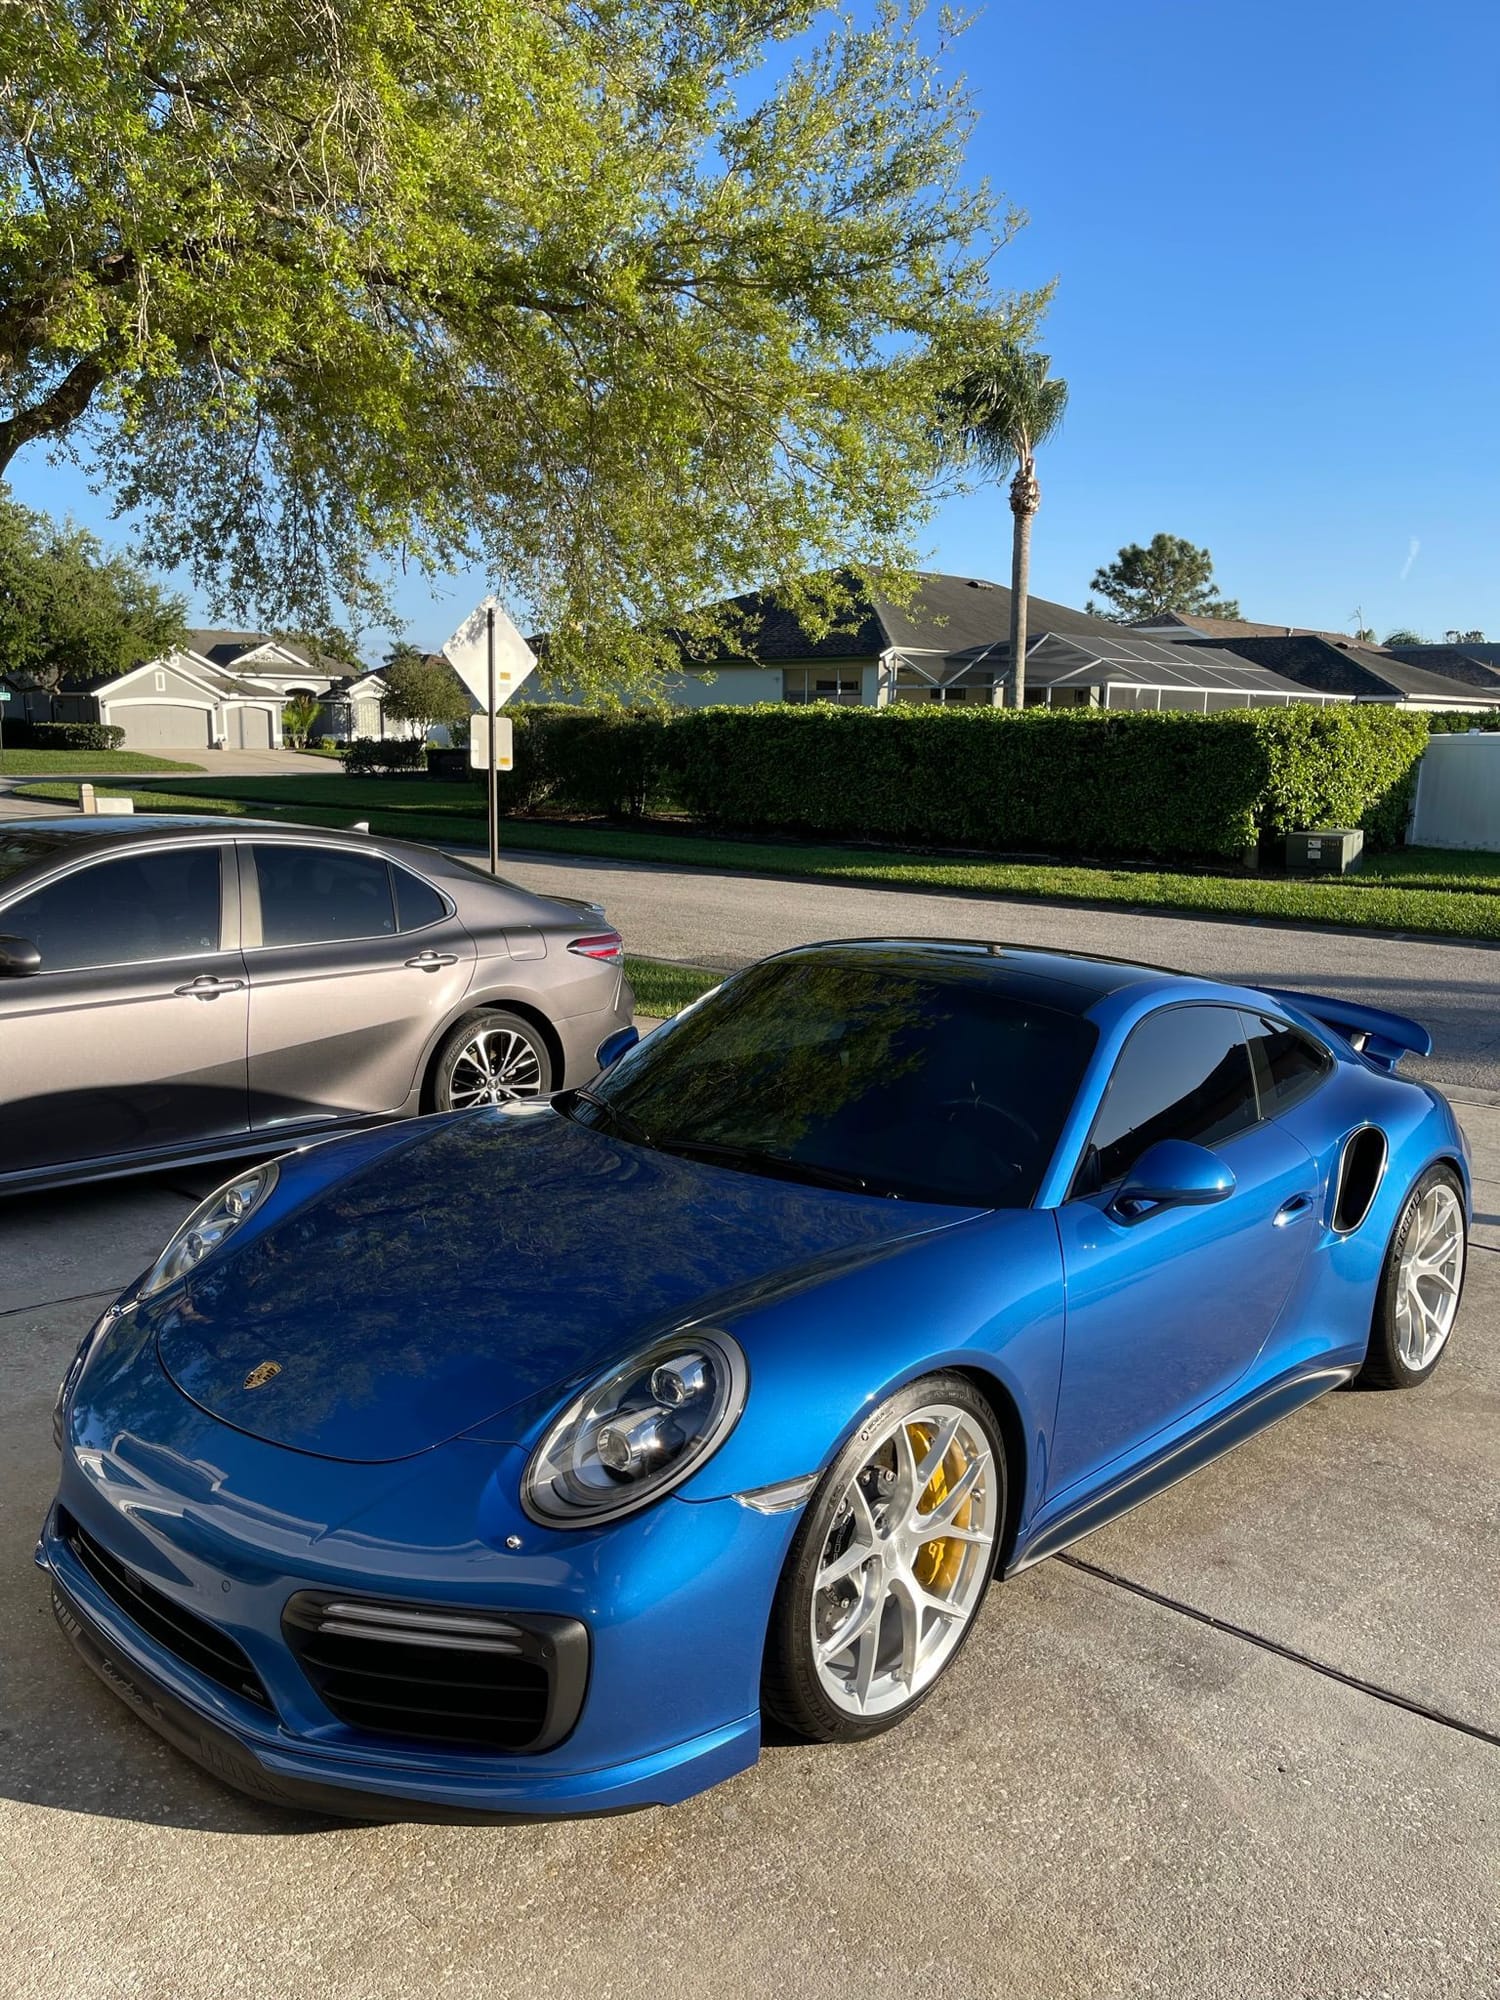 2017 Porsche 911 - 2017 911 Turbo S - Tastefully Modded - Dialed in - Transferable Warranty - Used - Tampa, FL 33637, United States